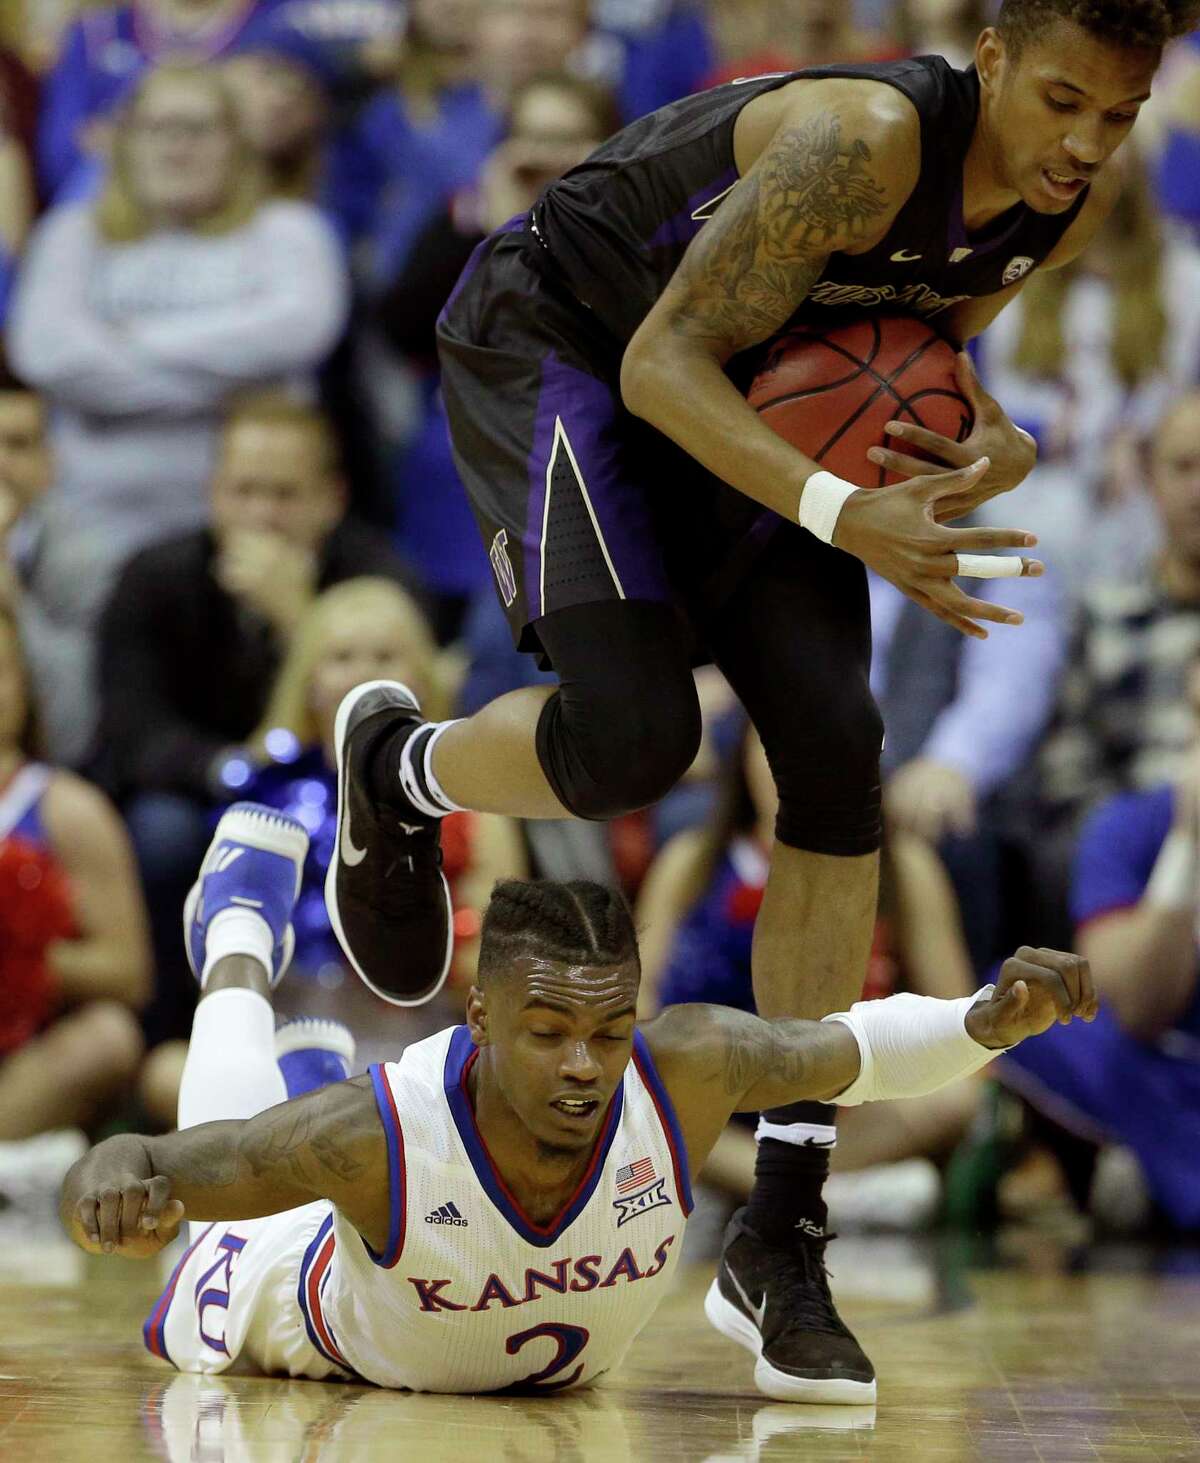 Washington's Hameir Wright beats Kansas' Lagerald Vick (2) to a loose ball during the first half of an NCAA college basketball game Wednesday, Dec. 6, 2017, in Kansas City, Mo. (AP Photo/Charlie Riedel) ORG XMIT: MOCR110